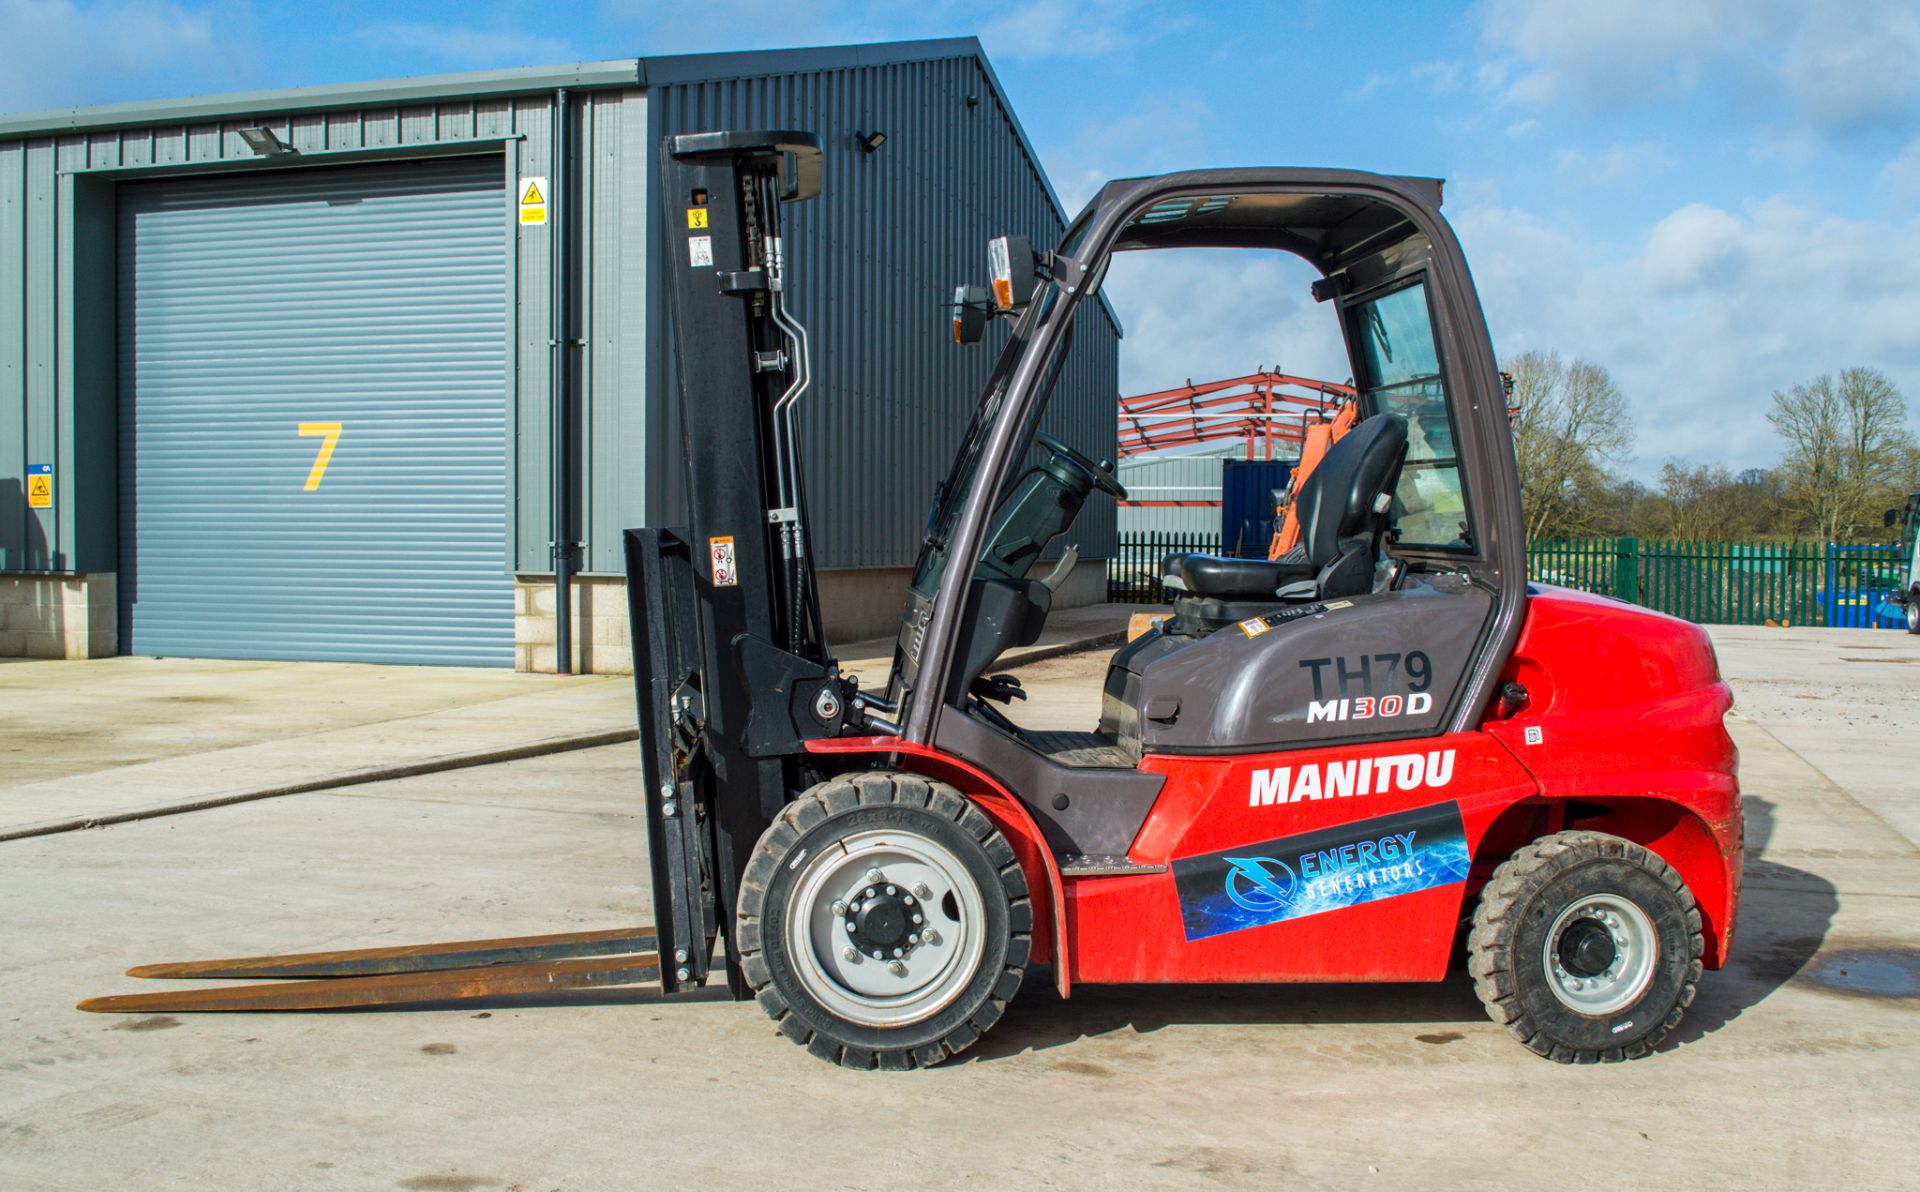 Manitou MI 30D 3 tonne diesel fork lift truck Year: 2020 S/N: 877370 Recorded Hours: 399 TH79 - Image 7 of 18